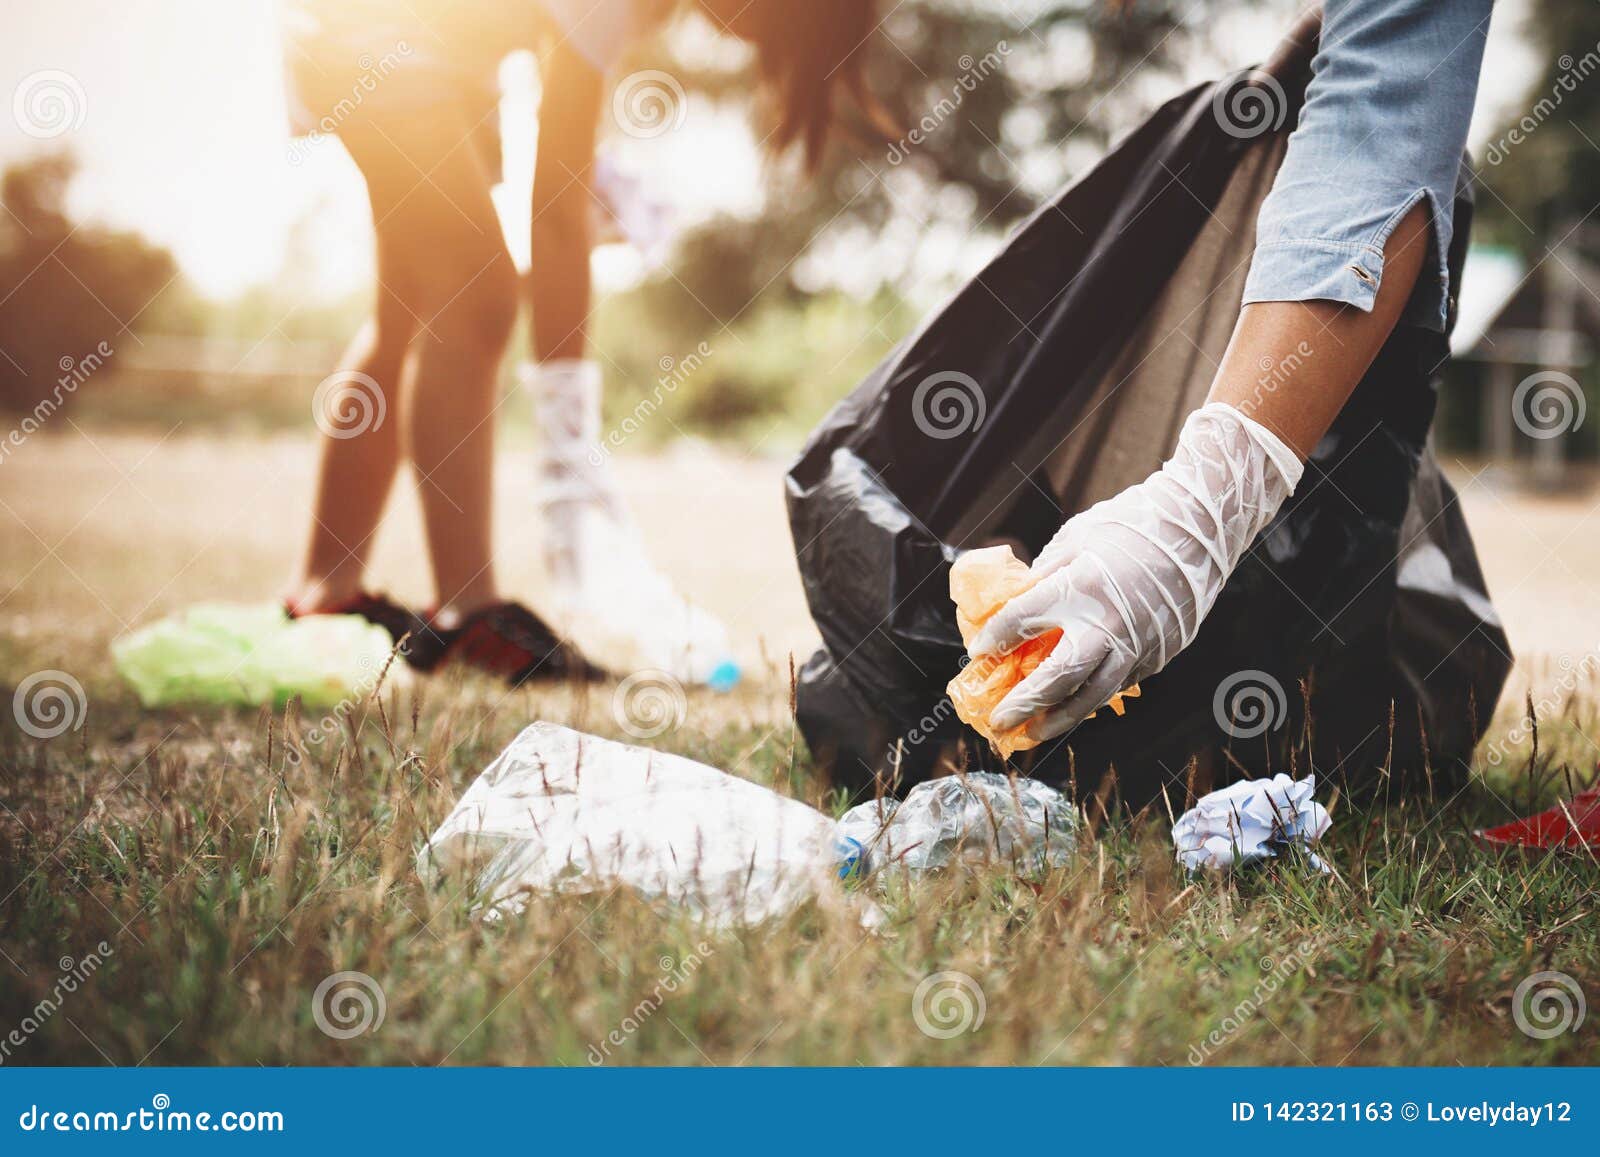 woman hand picking up garbage plastic for cleaning